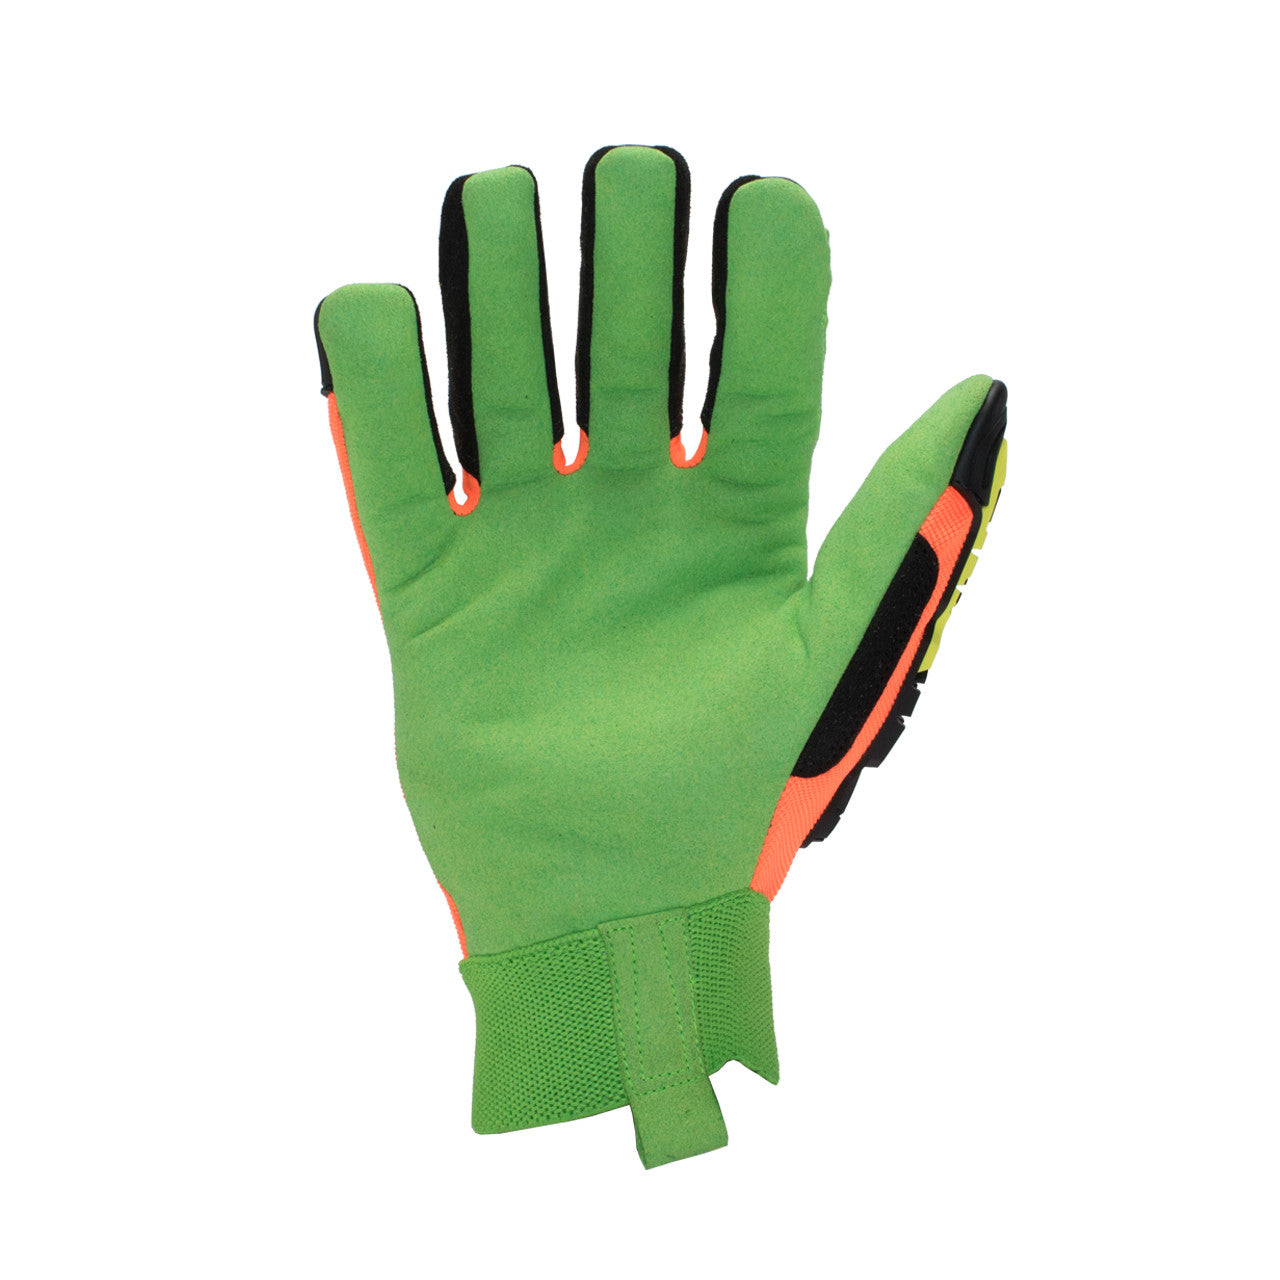 Ironclad KONG® LPI Closed Cuff A4 IVE™ Glove Orange/Green-eSafety Supplies, Inc